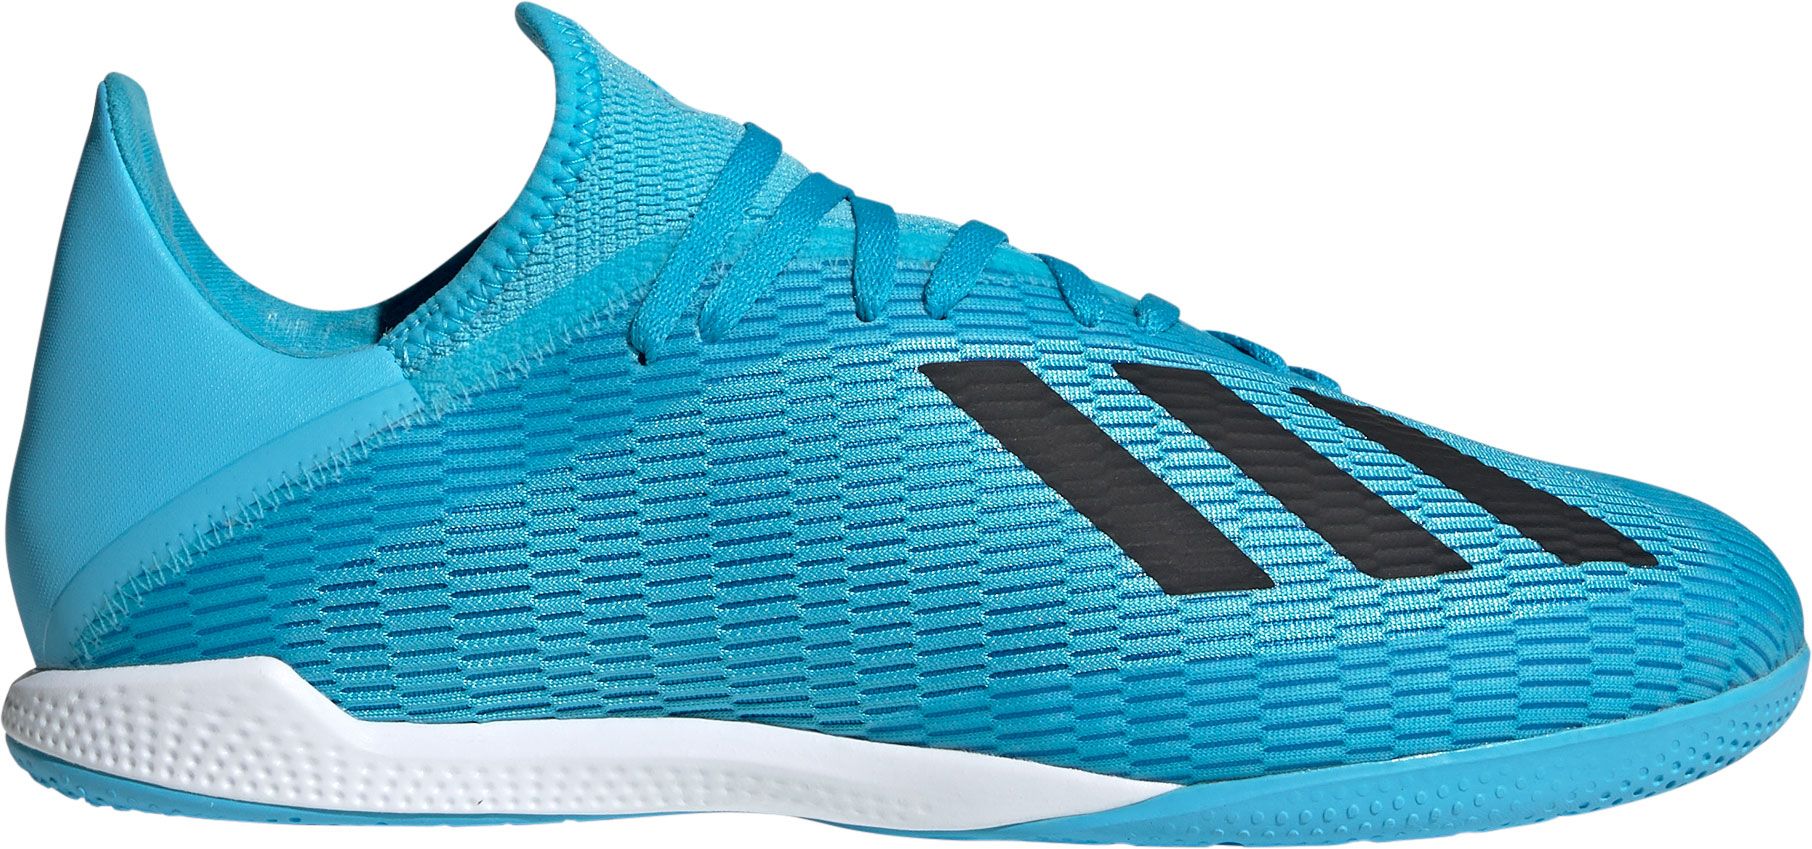 adidas soccer indoor shoes